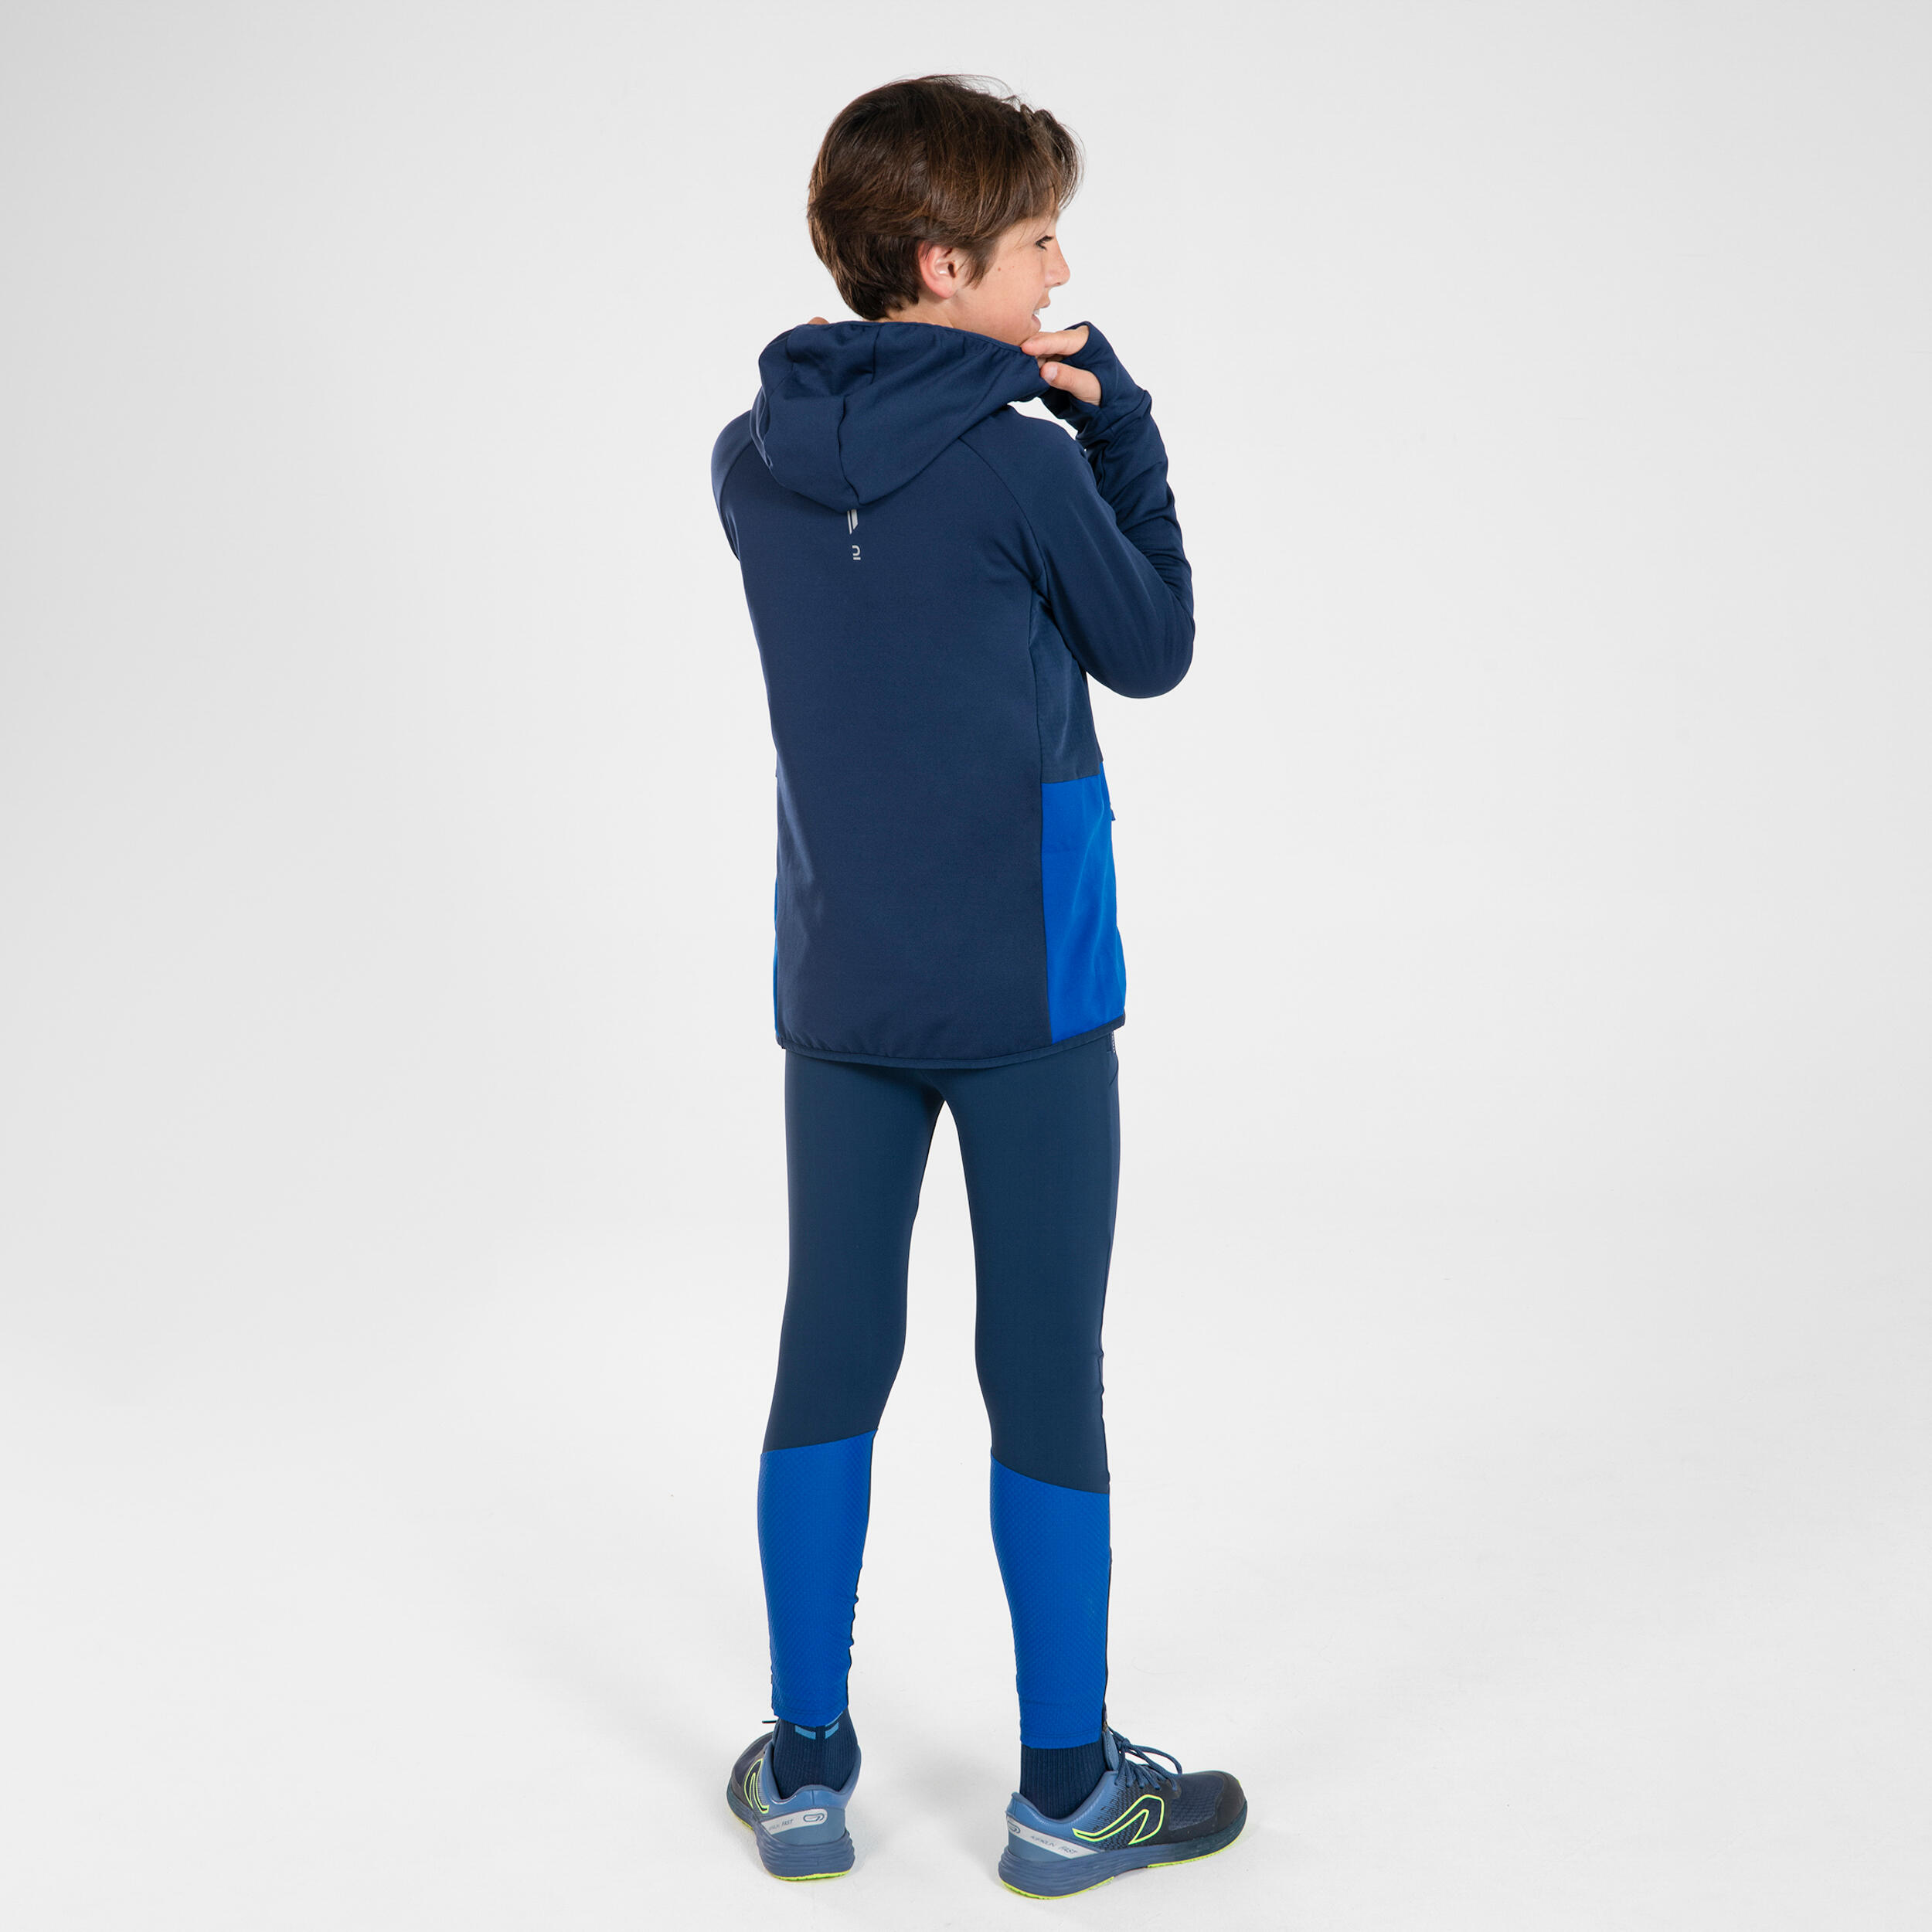 KIDS' RUNNING TIGHTS - KIPRUN DRY+ NAVY BLUE AND ELECTRIC BLUE 4/12